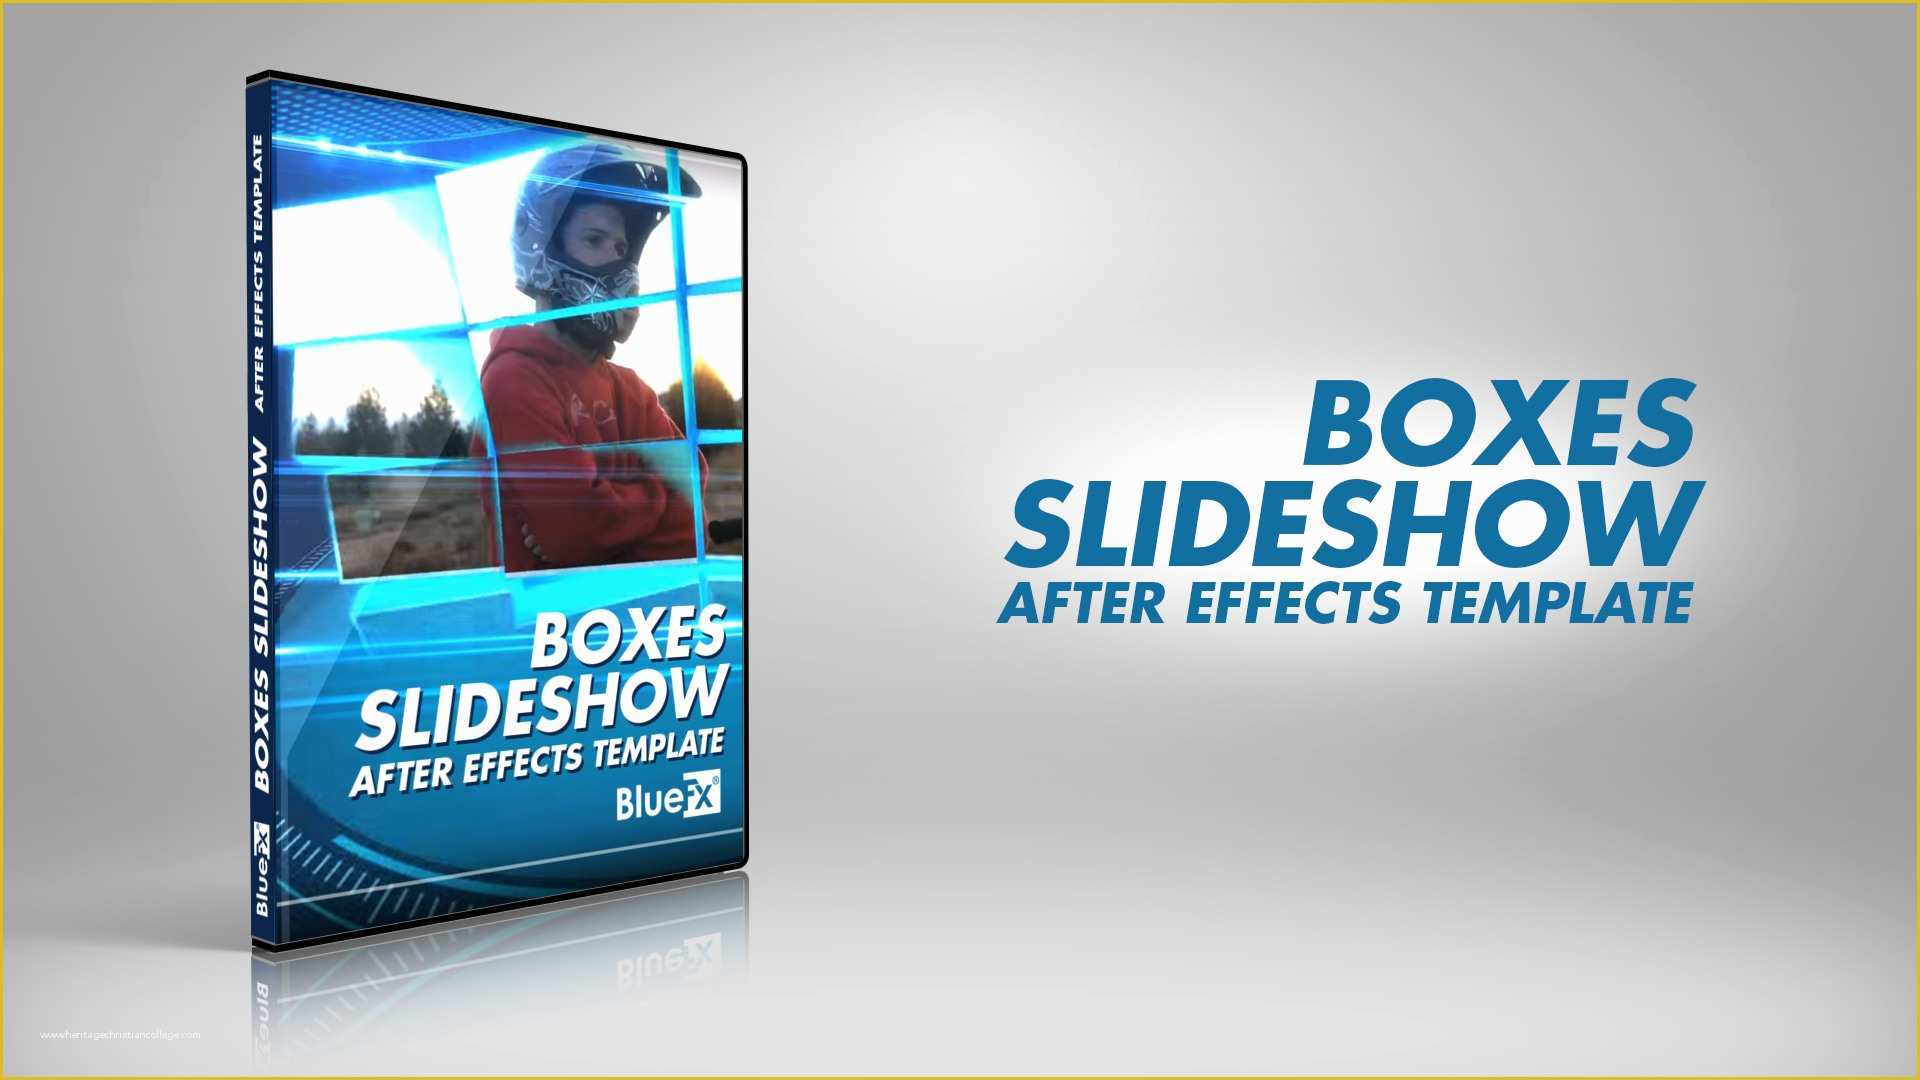 After Effects Simple Slideshow Template Free Of Boxes Slide after Effects Template